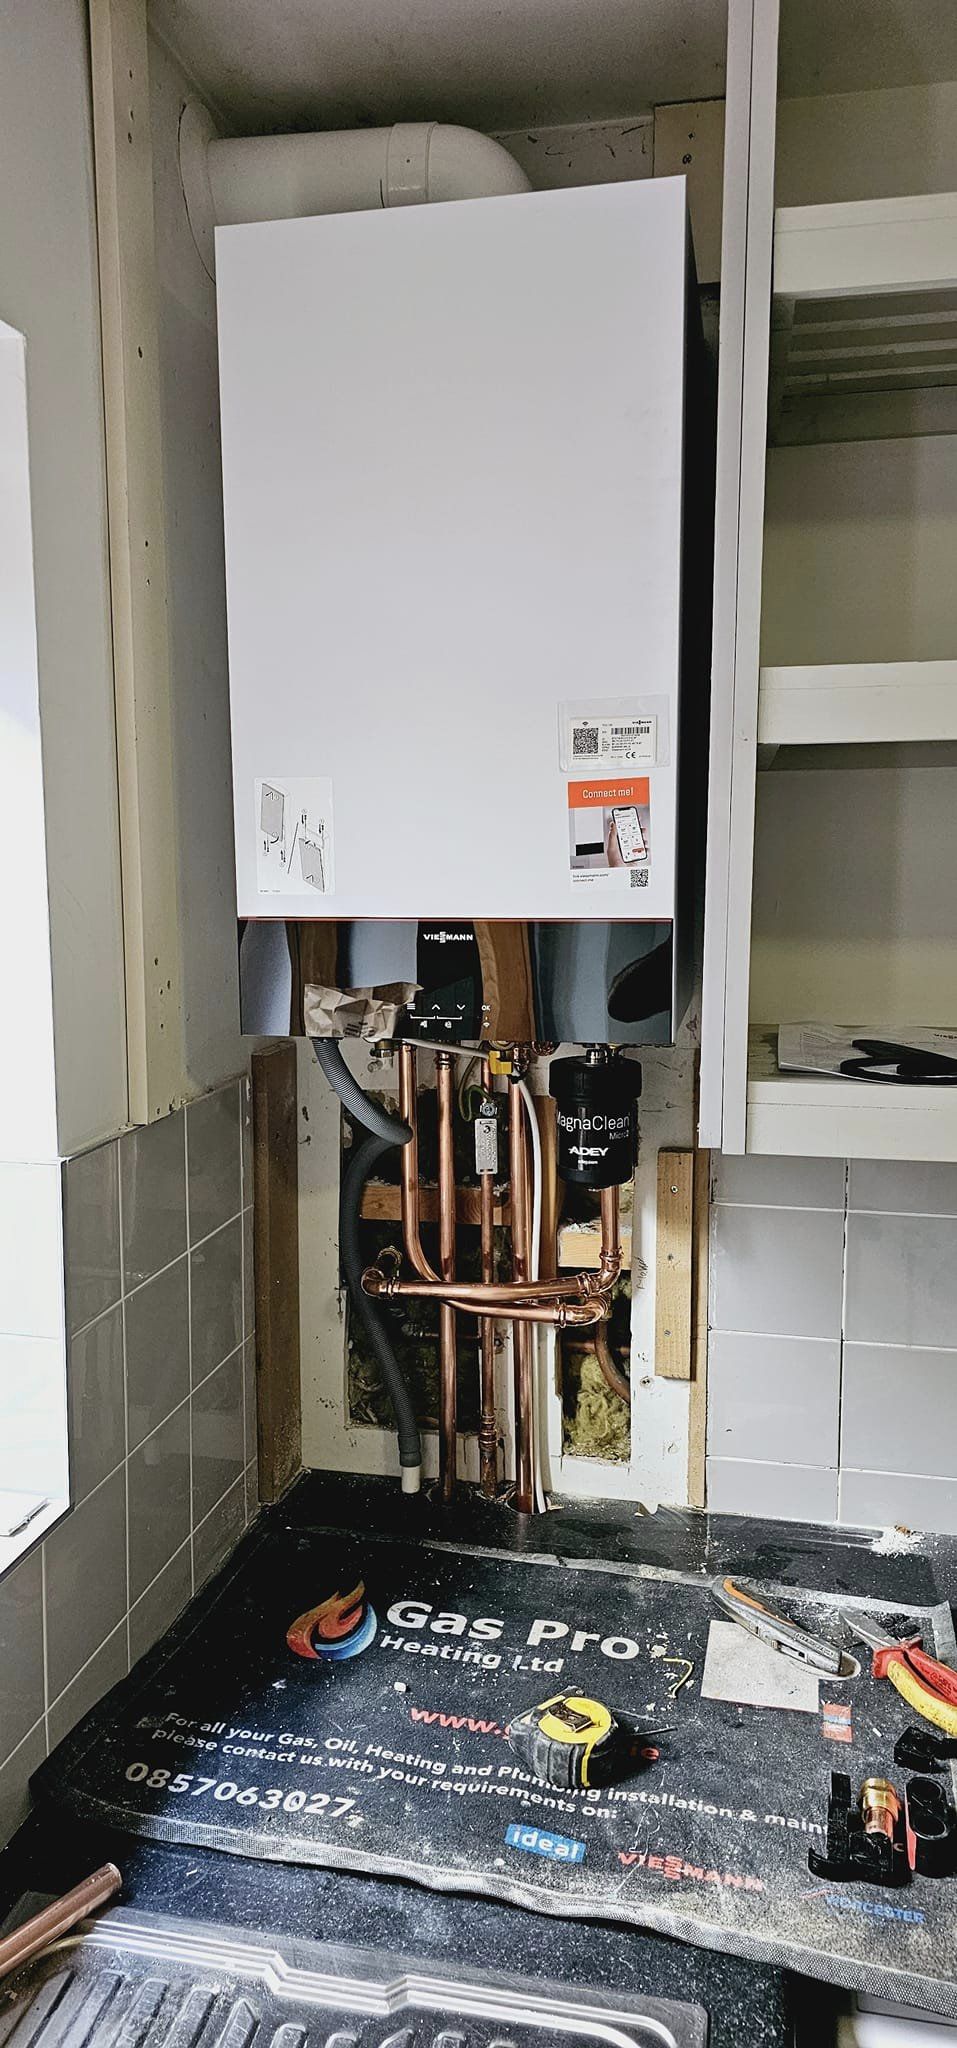 Viessmann Boiler installation in Killiney by K. O’Brien Heating and Plumbing